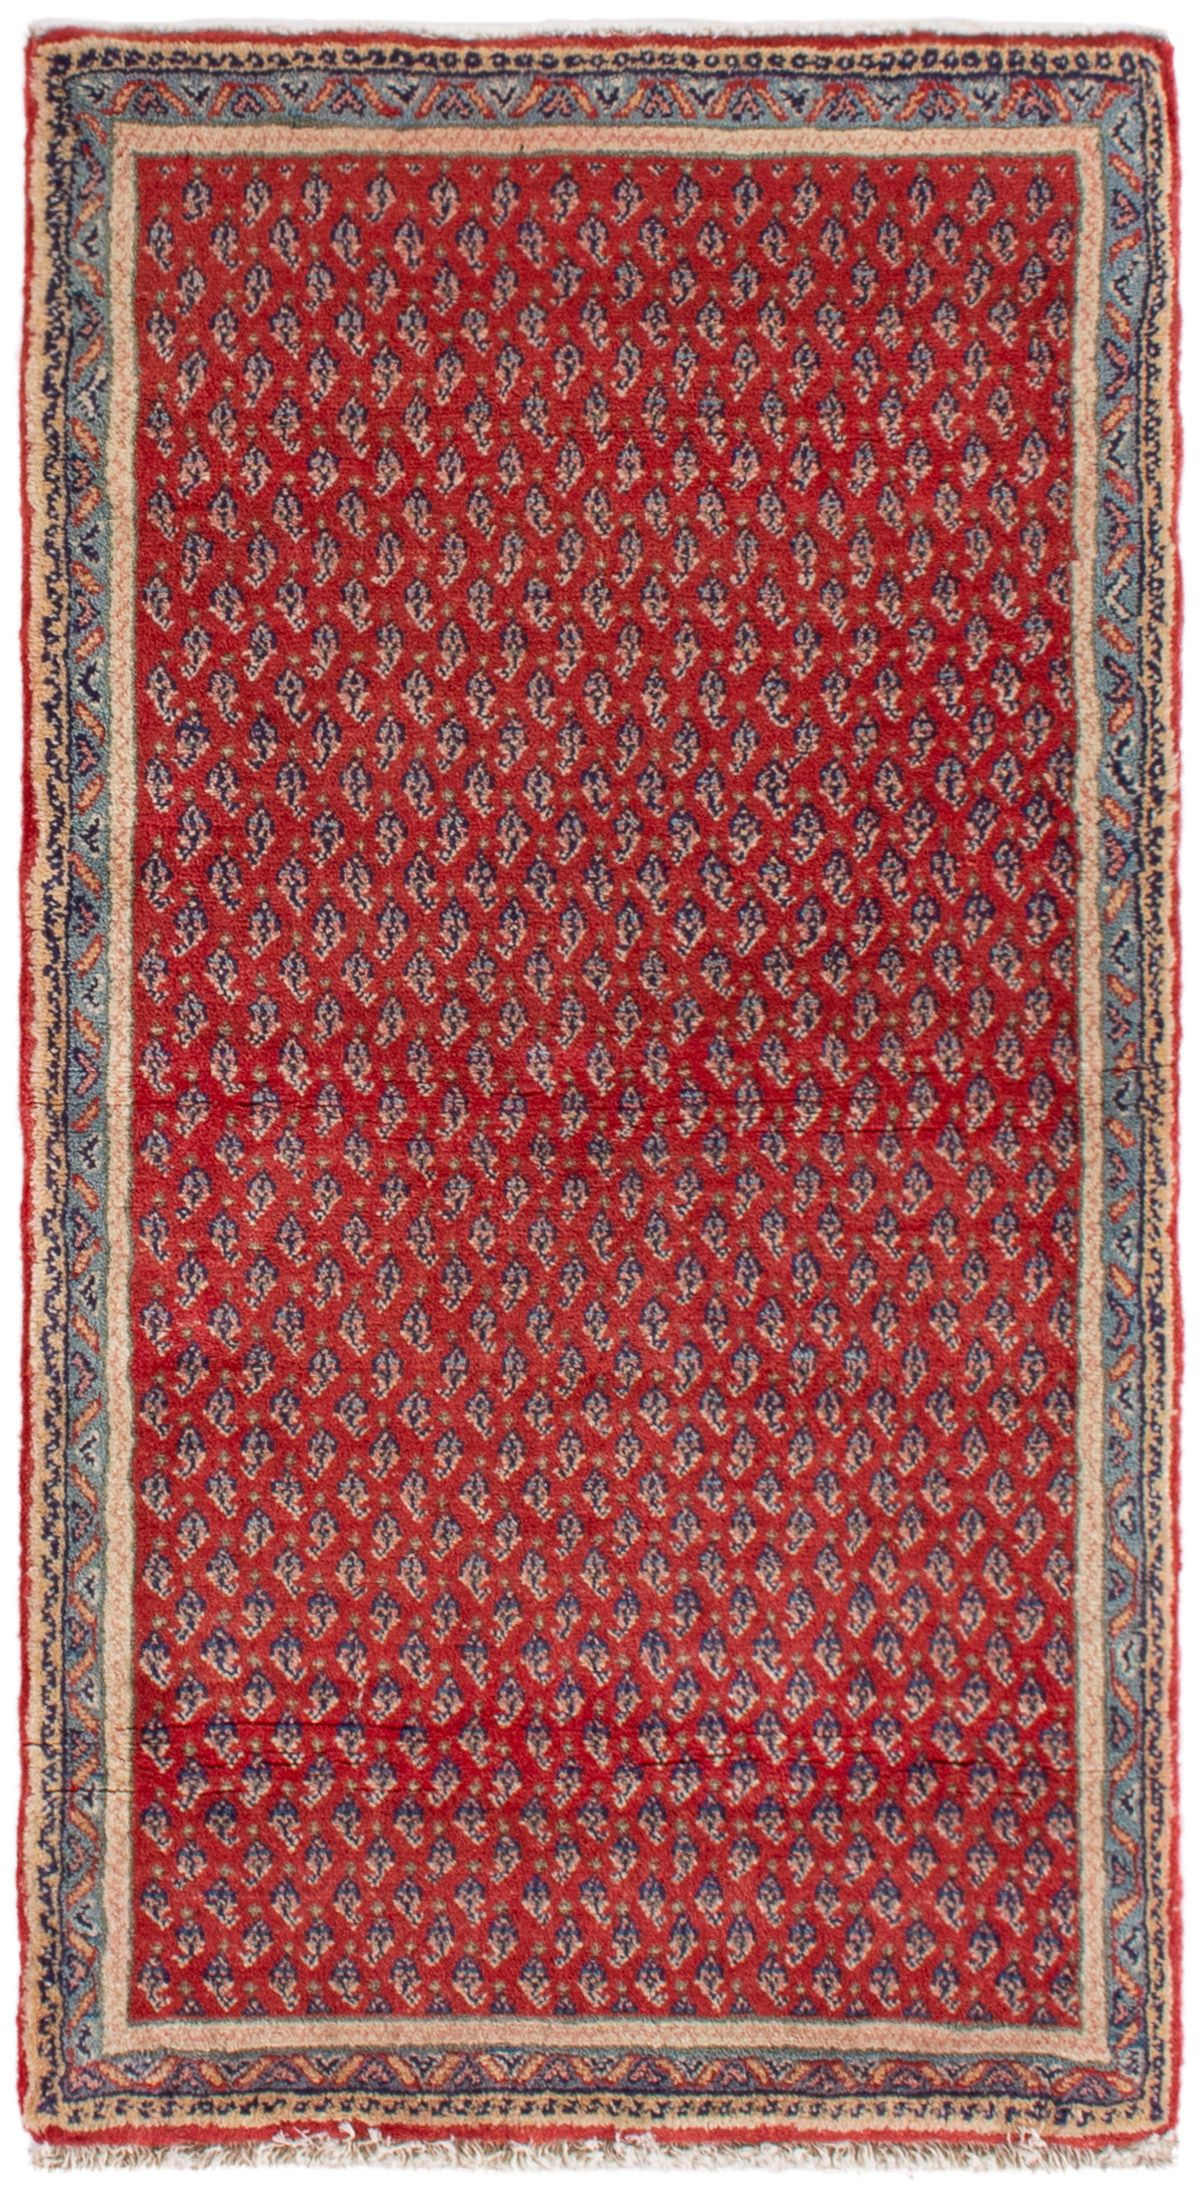 Hand-knotted Arak Wool Rug 2'4" x 4'4" Size: 2'4" x 4'4"  